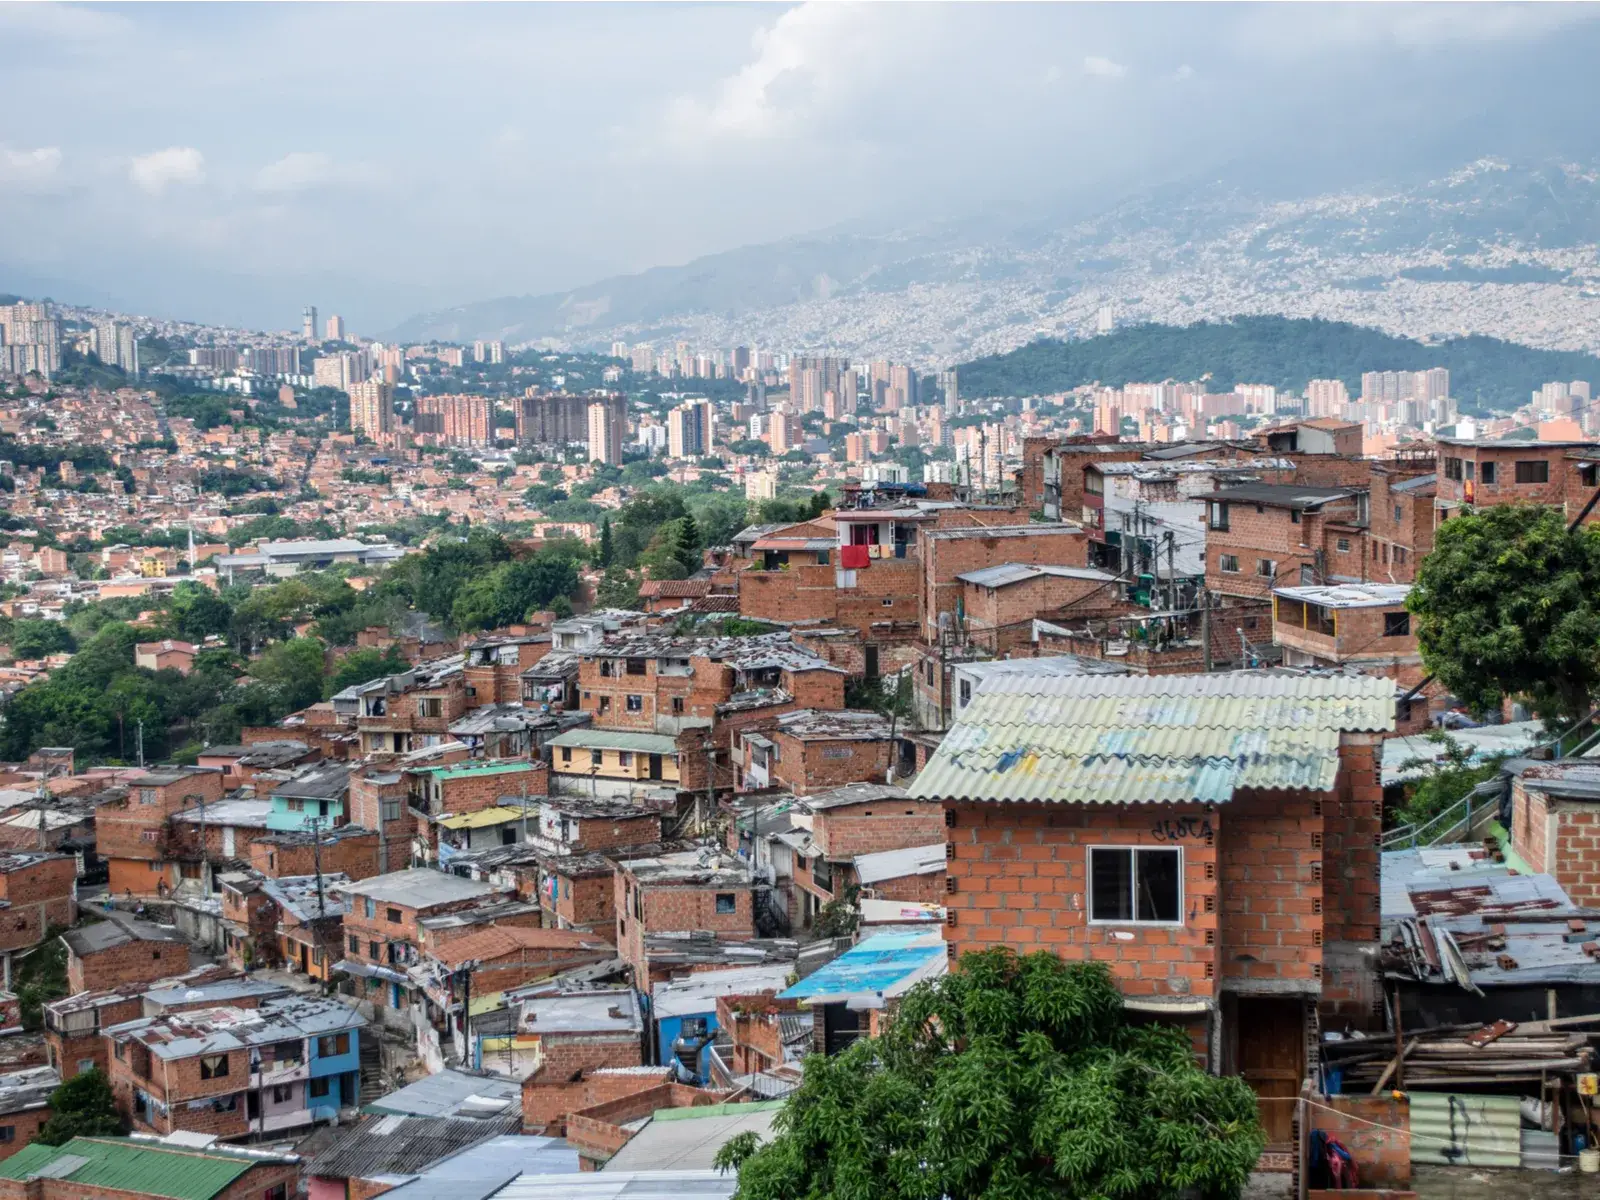 Terrible part of town picturing the slums in Medellin for a piece titled Is Colombia Safe